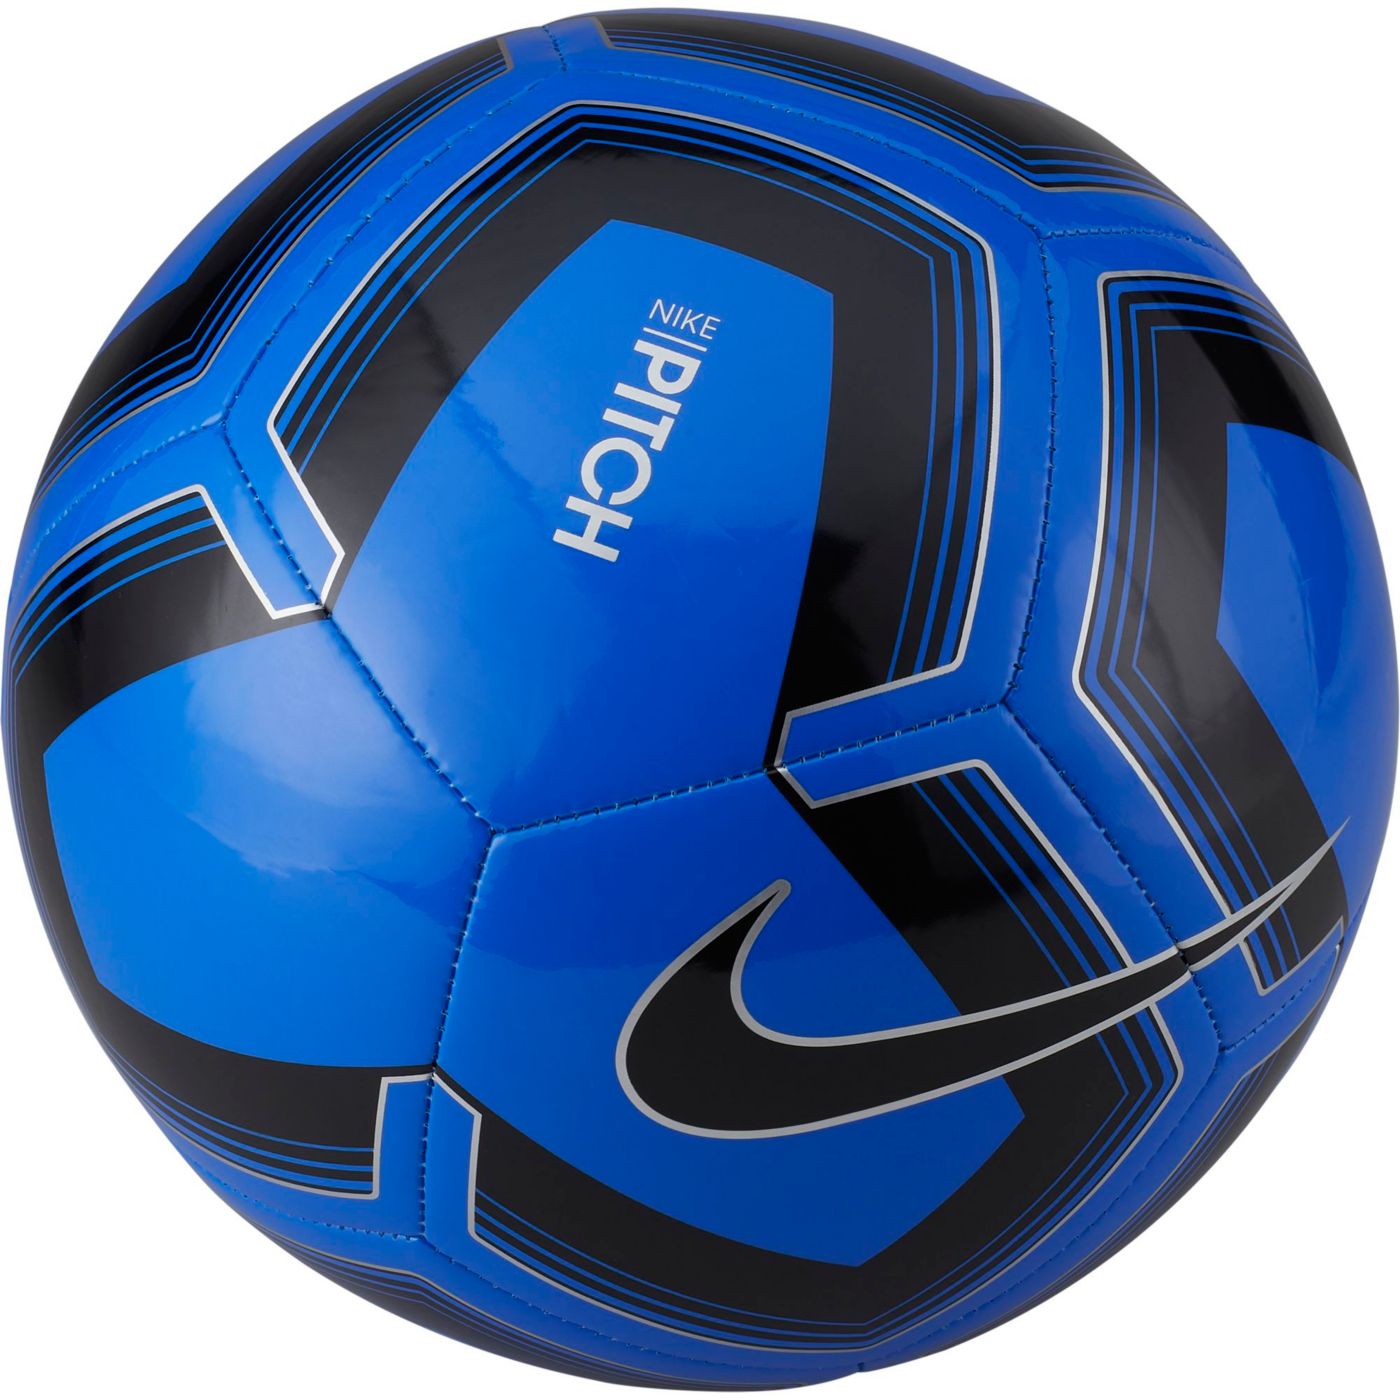 Nike Pitch Training Soccer Ball DICK'S Sporting Goods